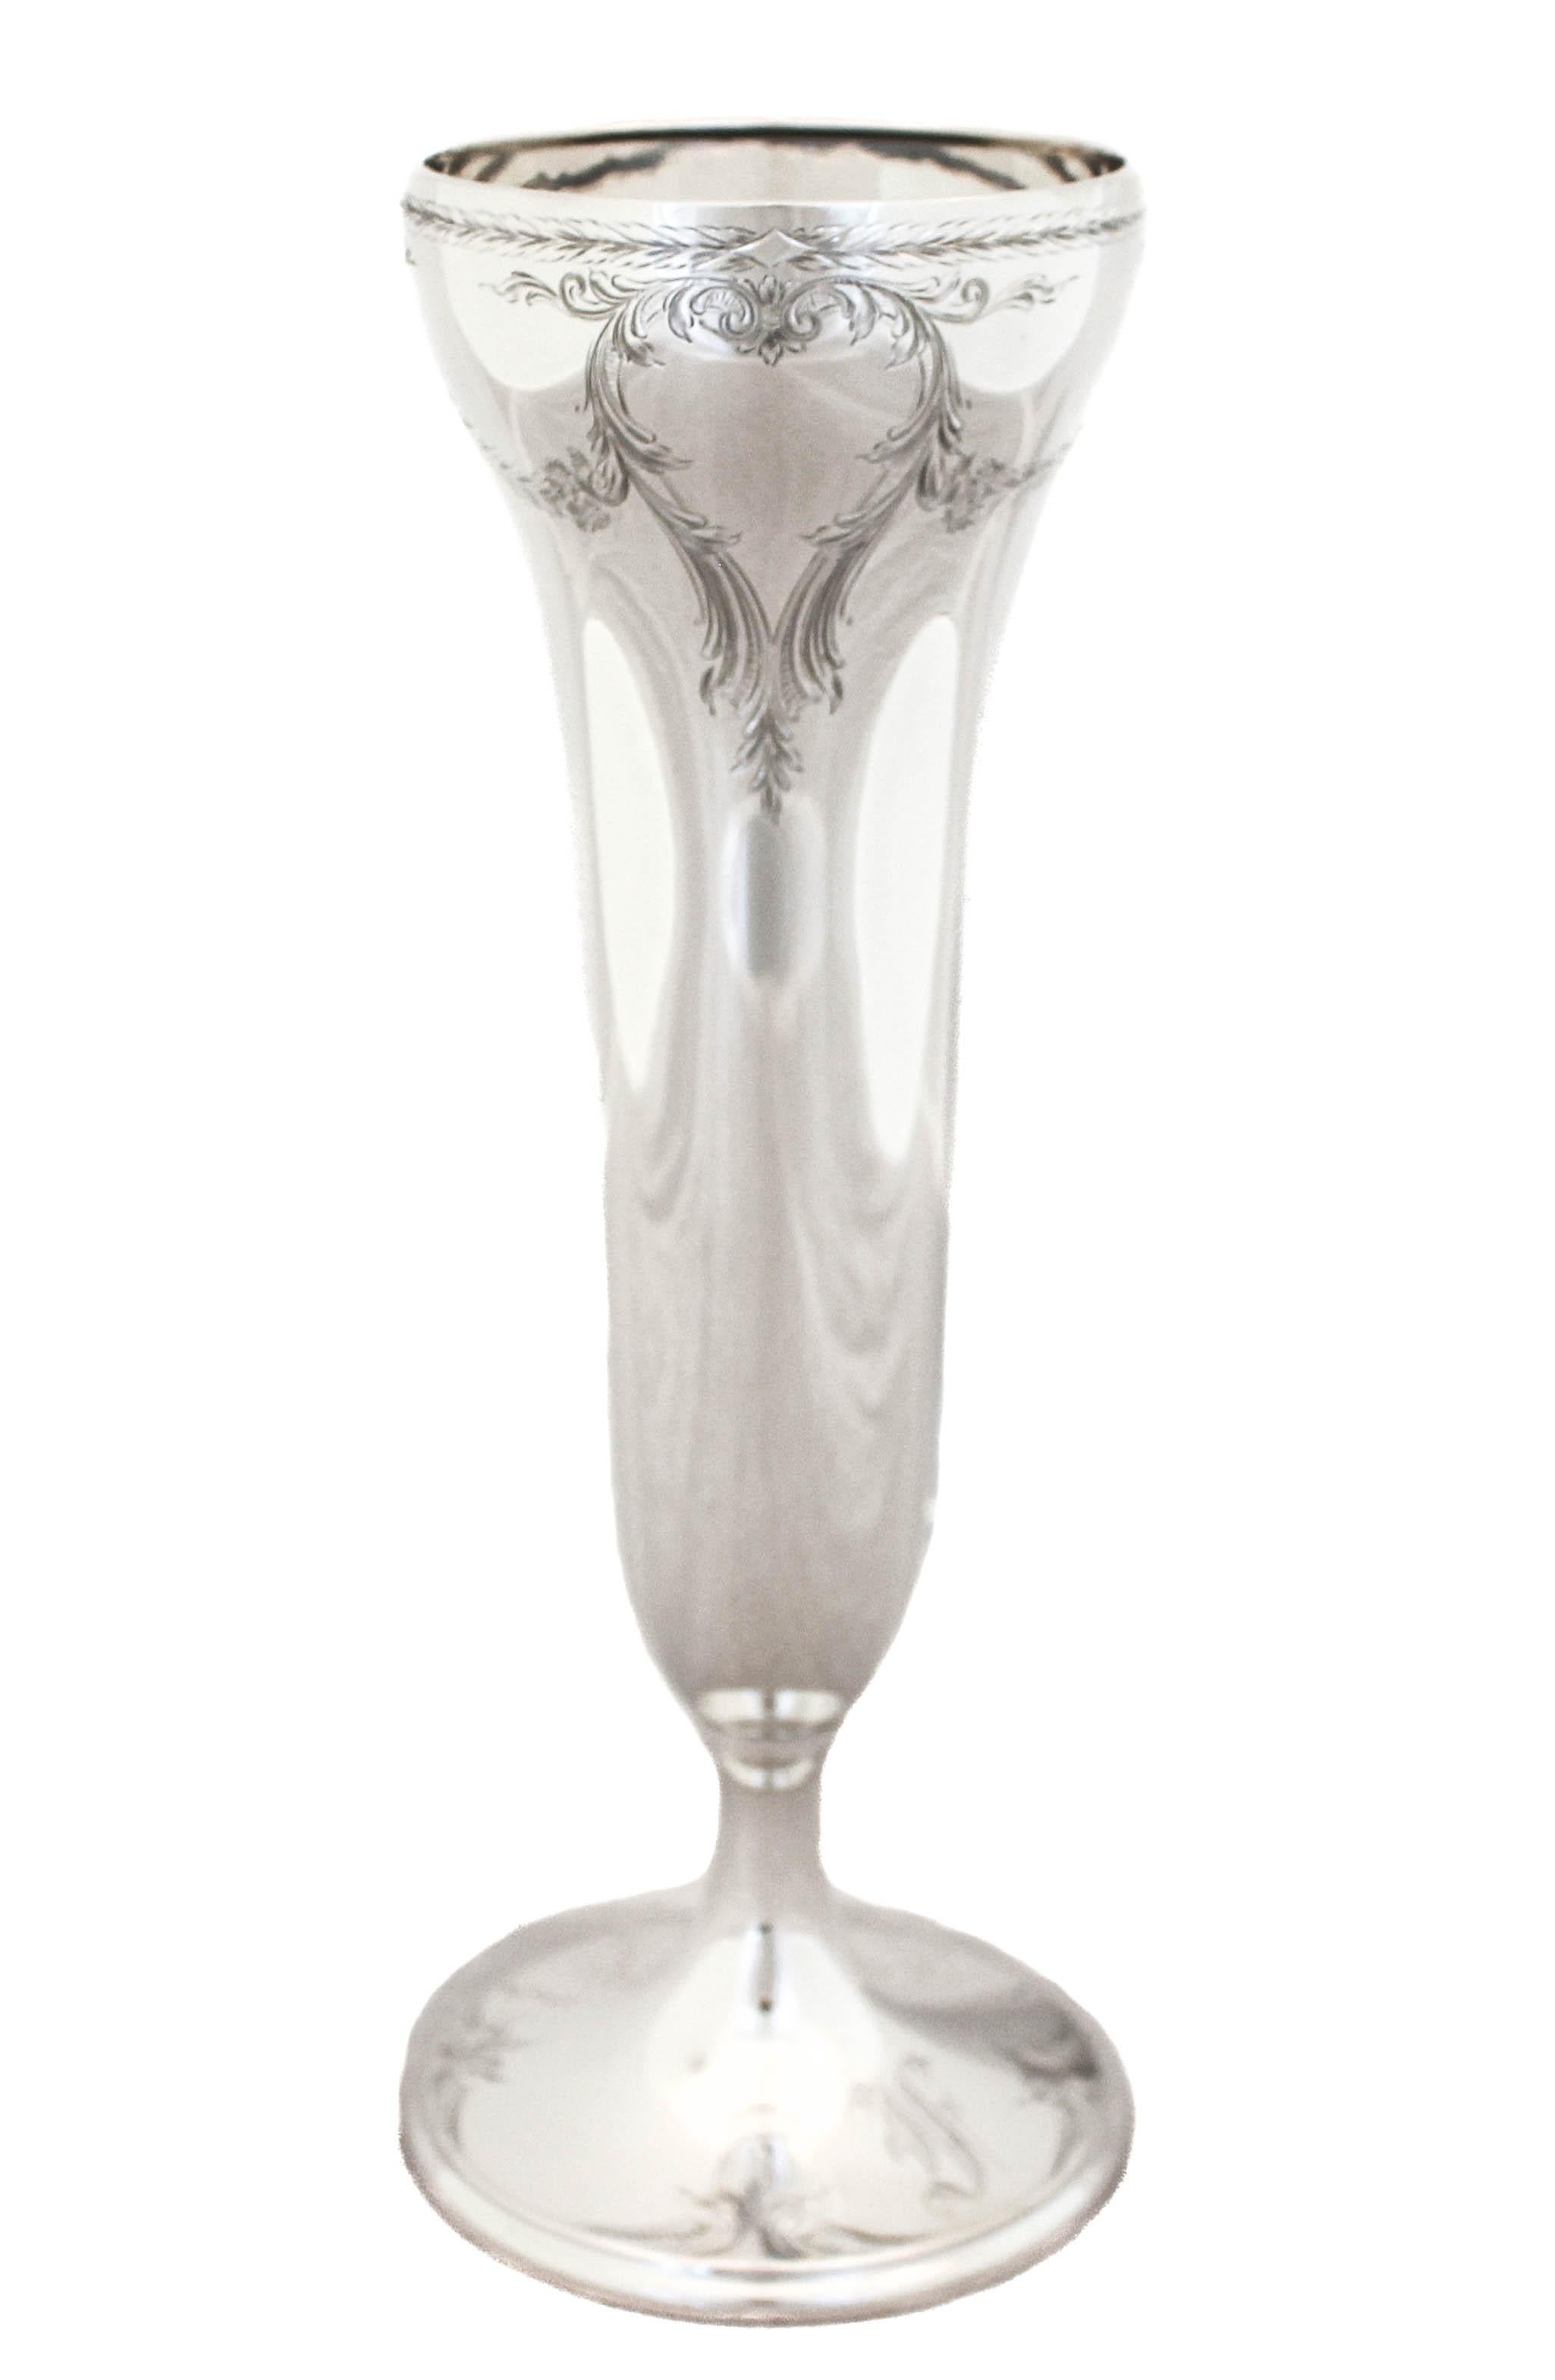 Being offered is a sterling silver vase by the Watson Silver Company. It has a delicately etched design around the top and again around the base. Wreaths, flowers and scrolls give this vase a feminine feel. On the base there is a hand engraved Old